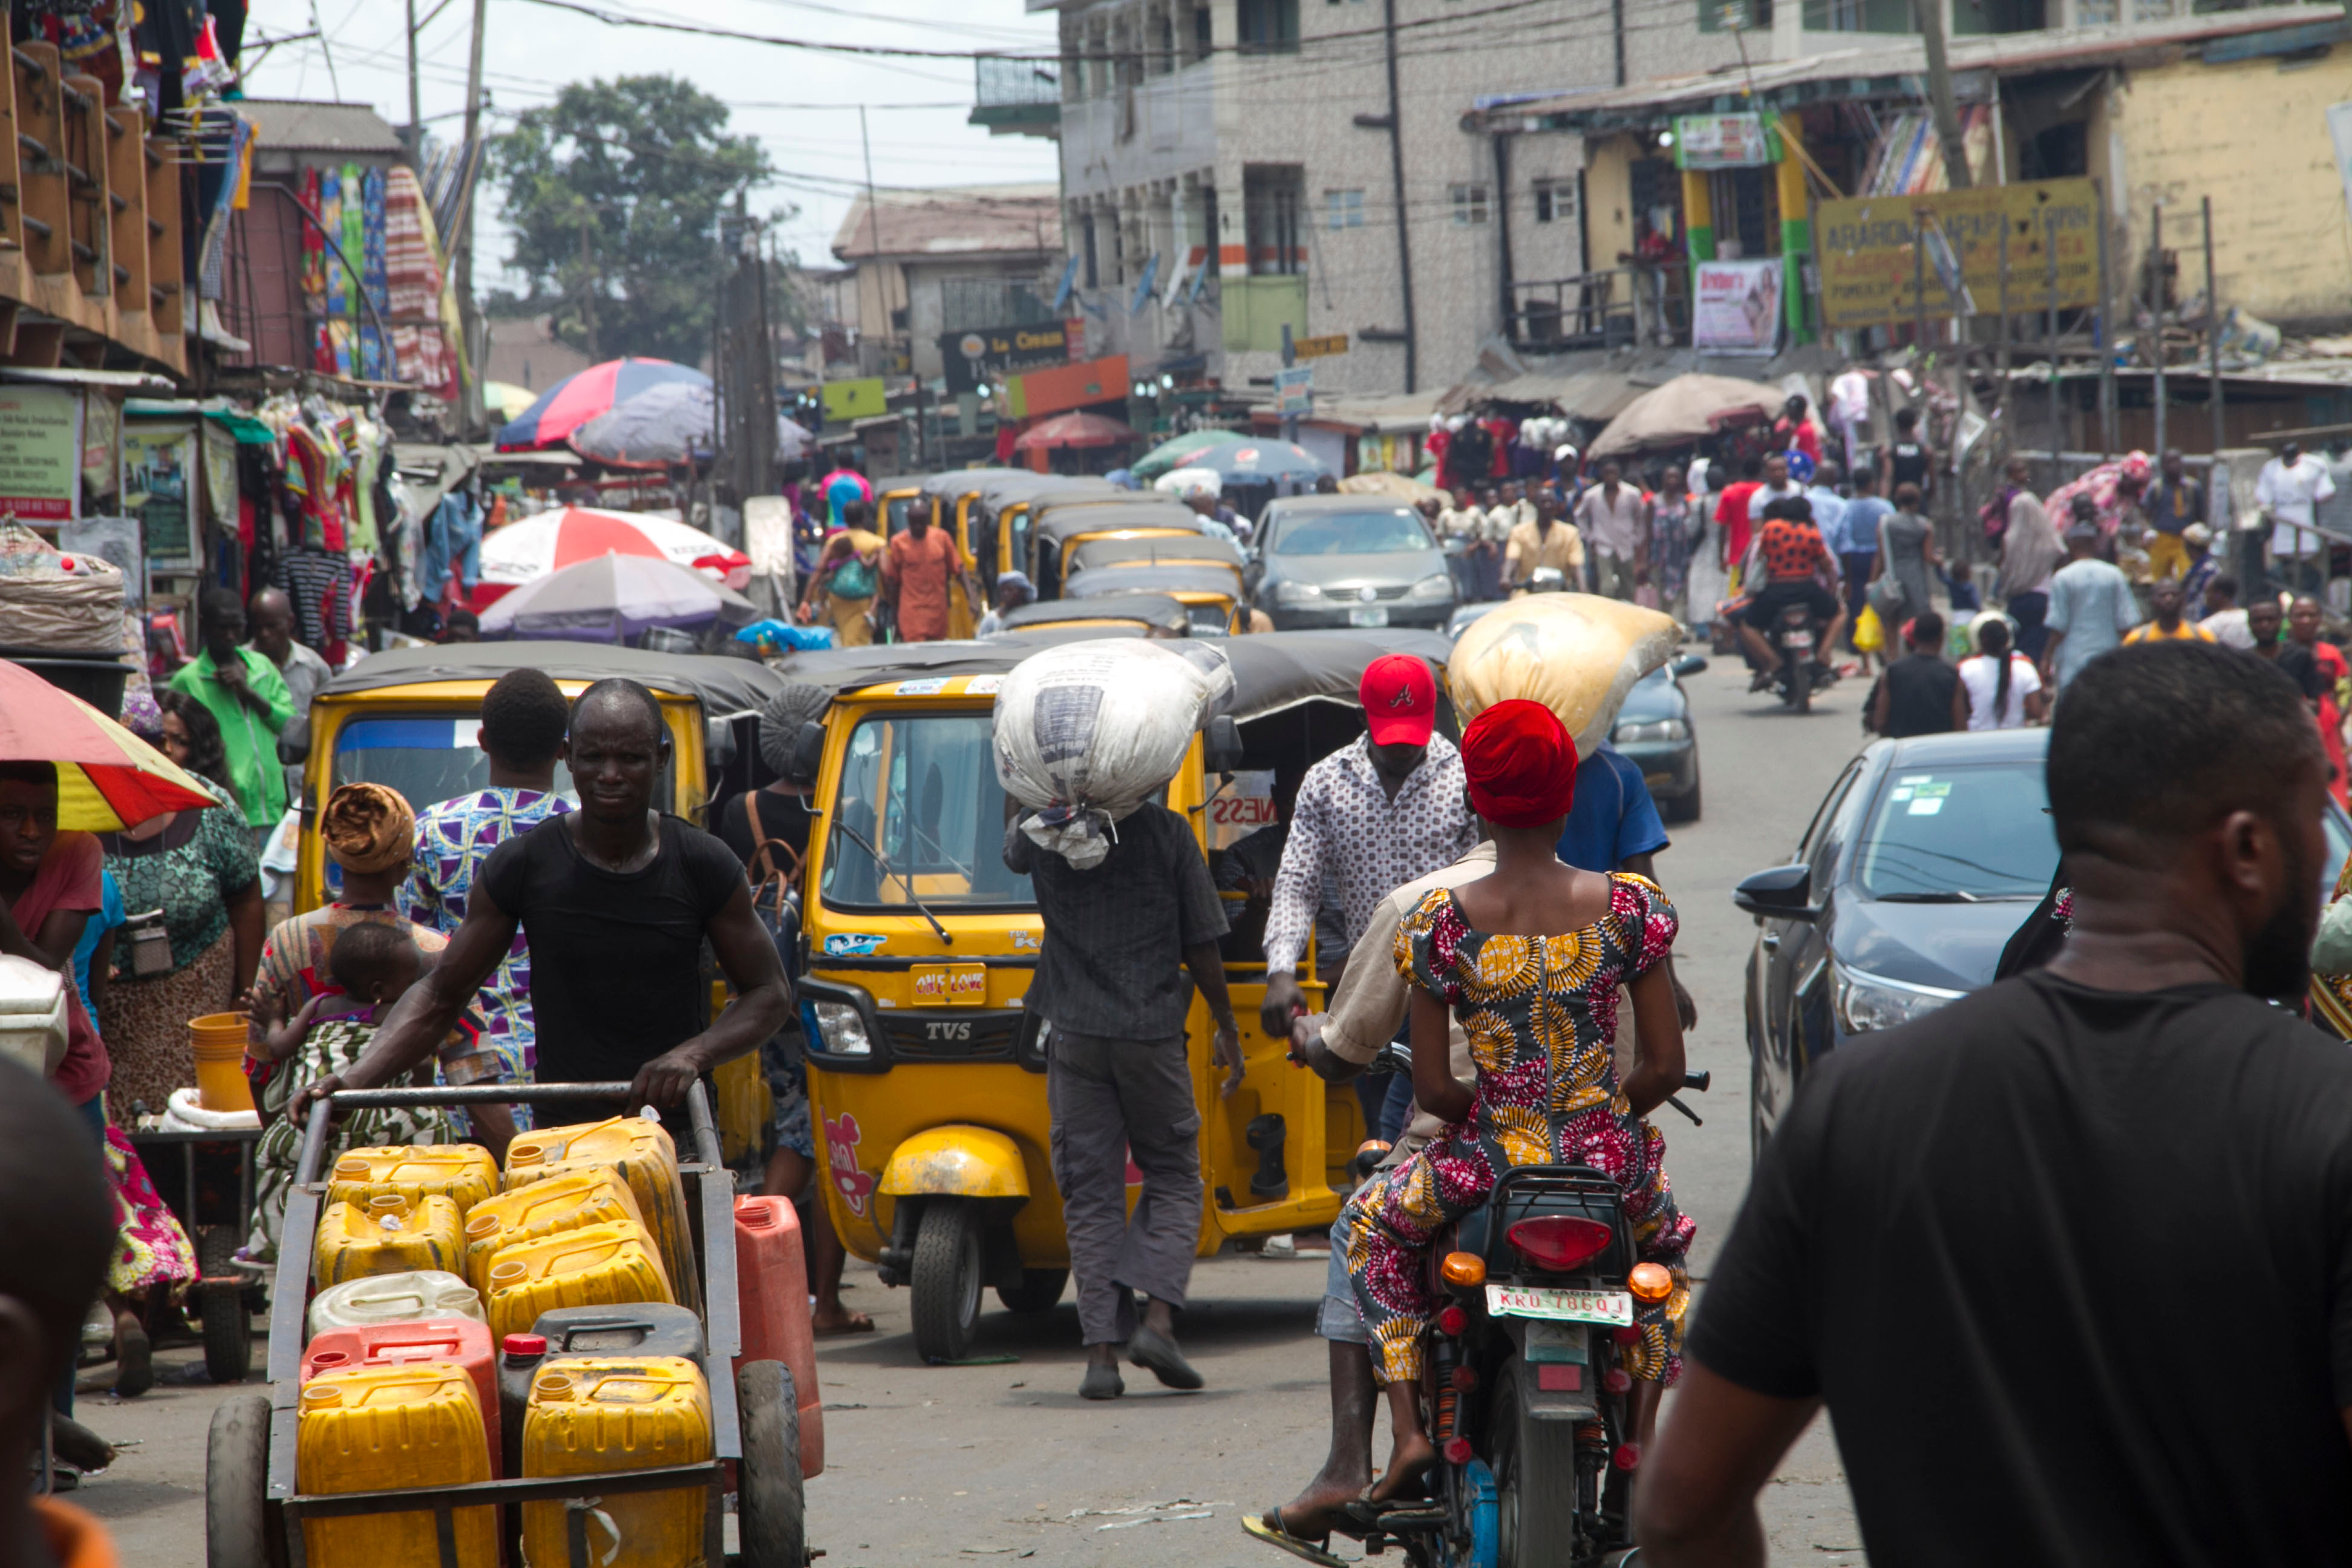 Ajegunle City, Lagos State Nigeria March 22, 2018: Busy Streets bustling with commercial activity